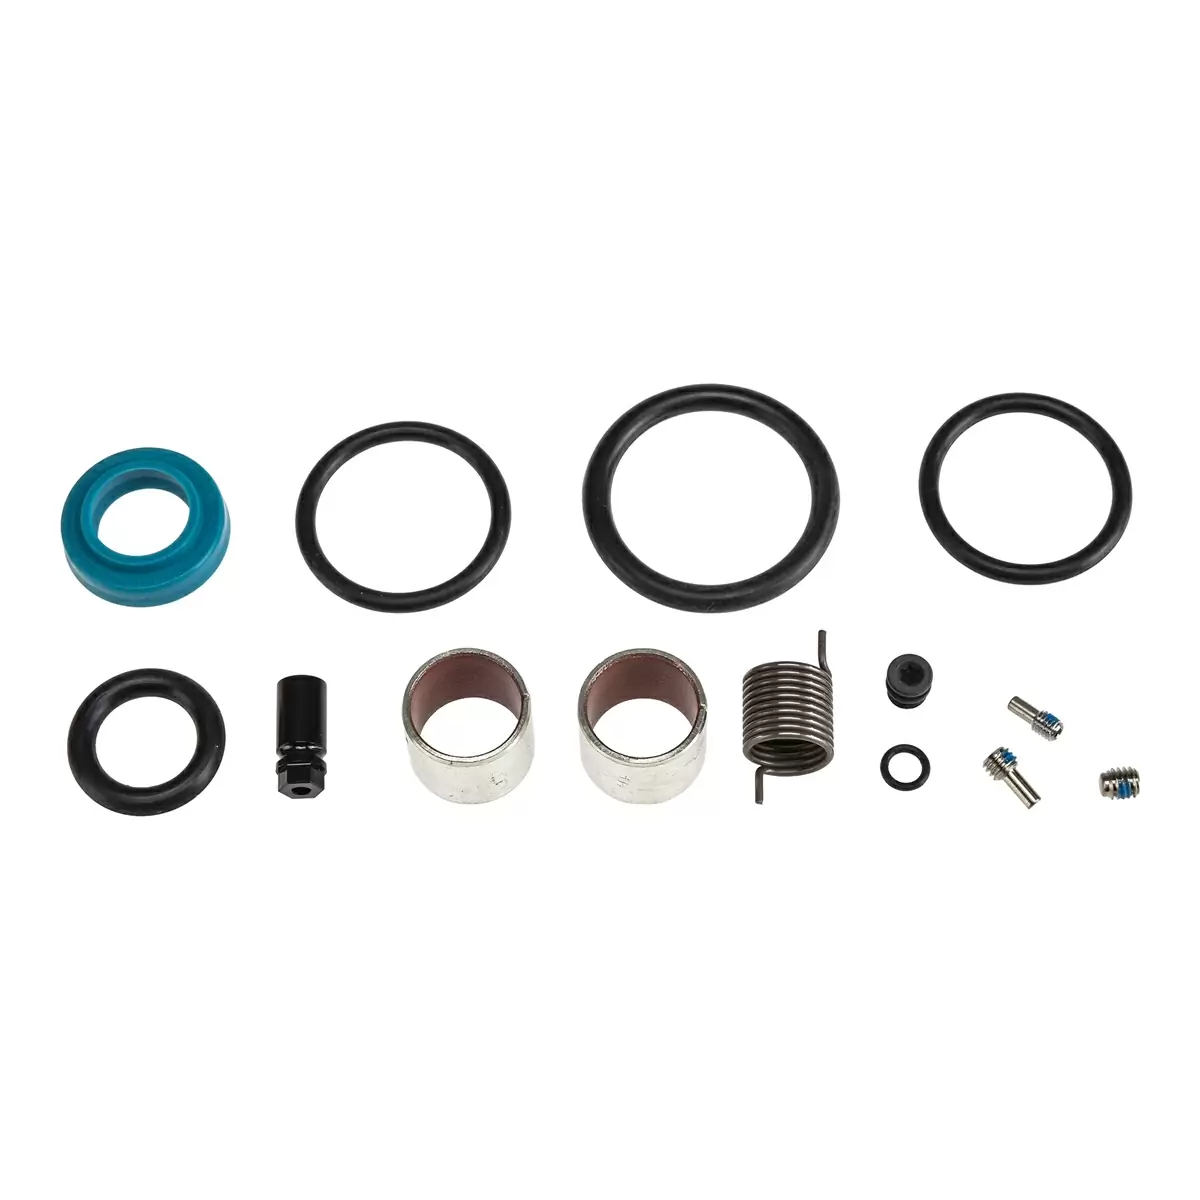 Service Kit 200 hours / 1 year for Super Deluxe Coil / Coil Remote A1 - A2 (2018-2020) rear shox - image